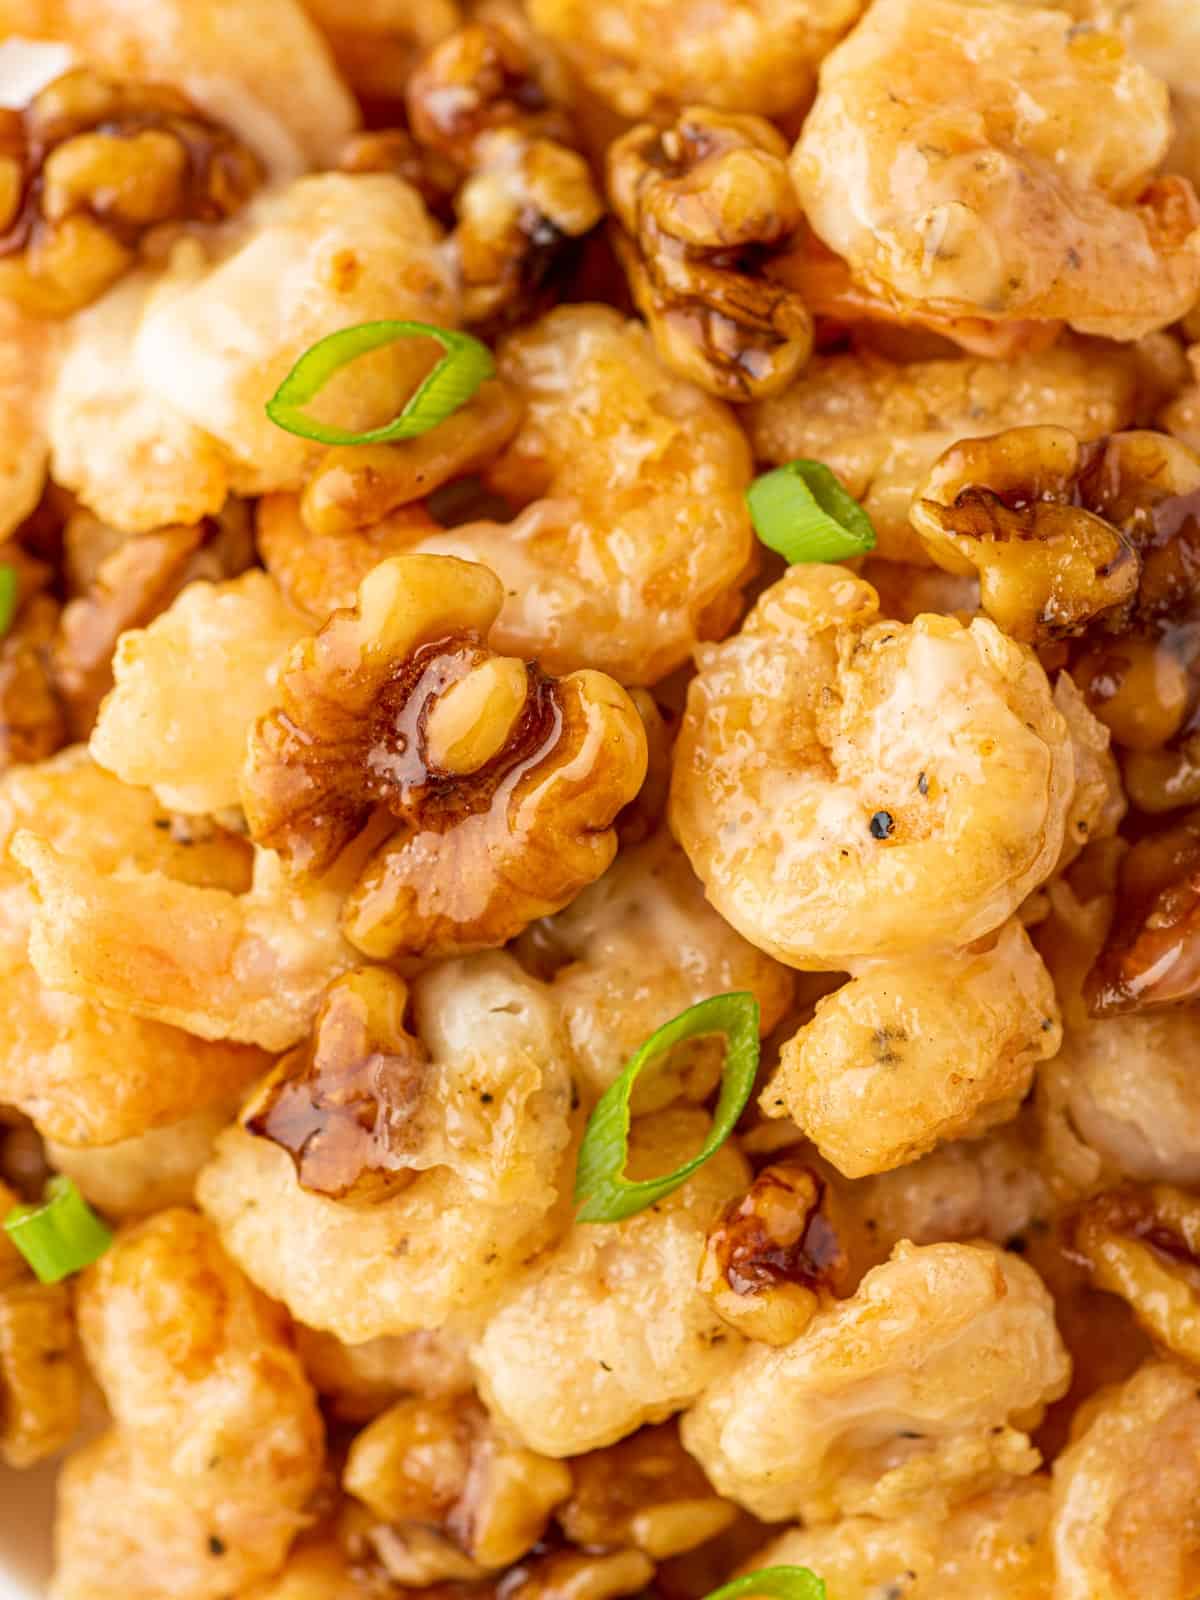 A pile of sweet honey shrimp with walnuts and green onions.